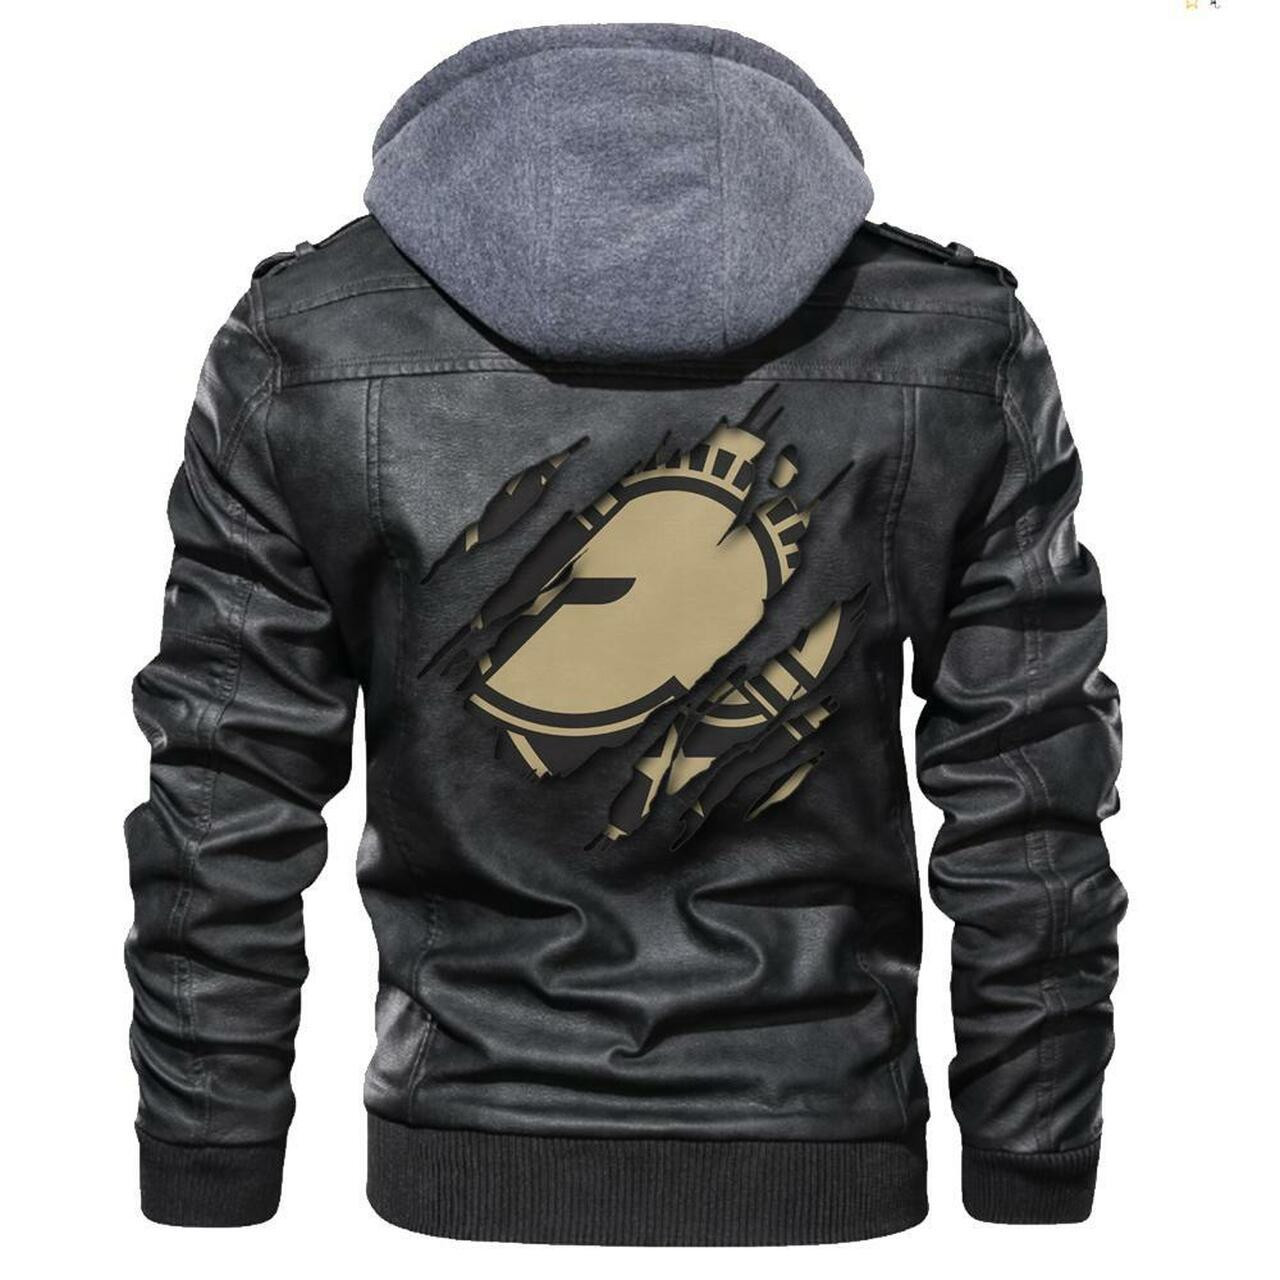 If you're looking for a trendy shirt hoodie, check out below 41